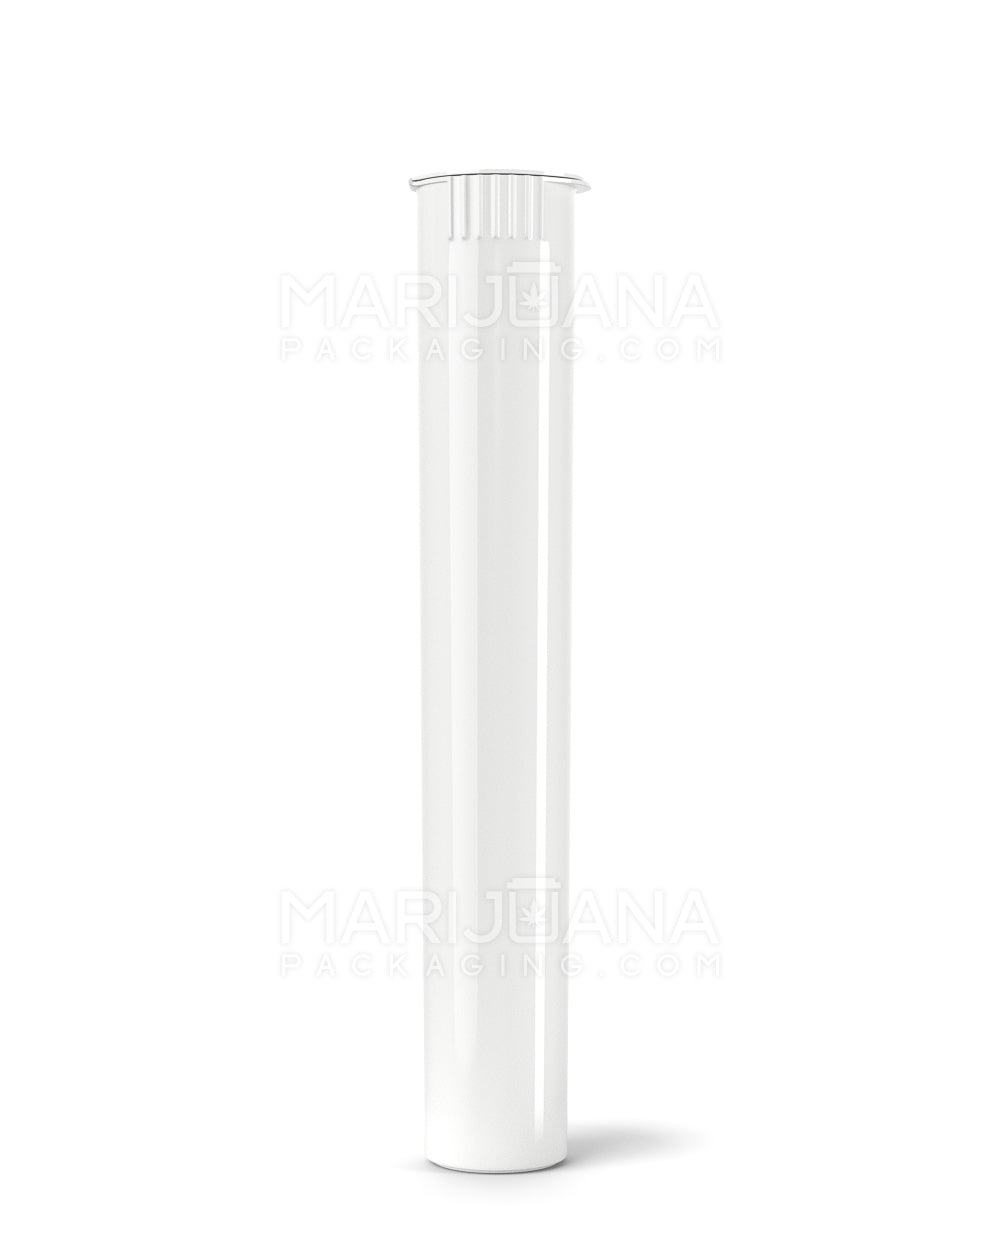 Child Resistant | King Size Pop Top Opaque Plastic Pre-Roll Tubes | 116mm - White - 1000 Count - 2